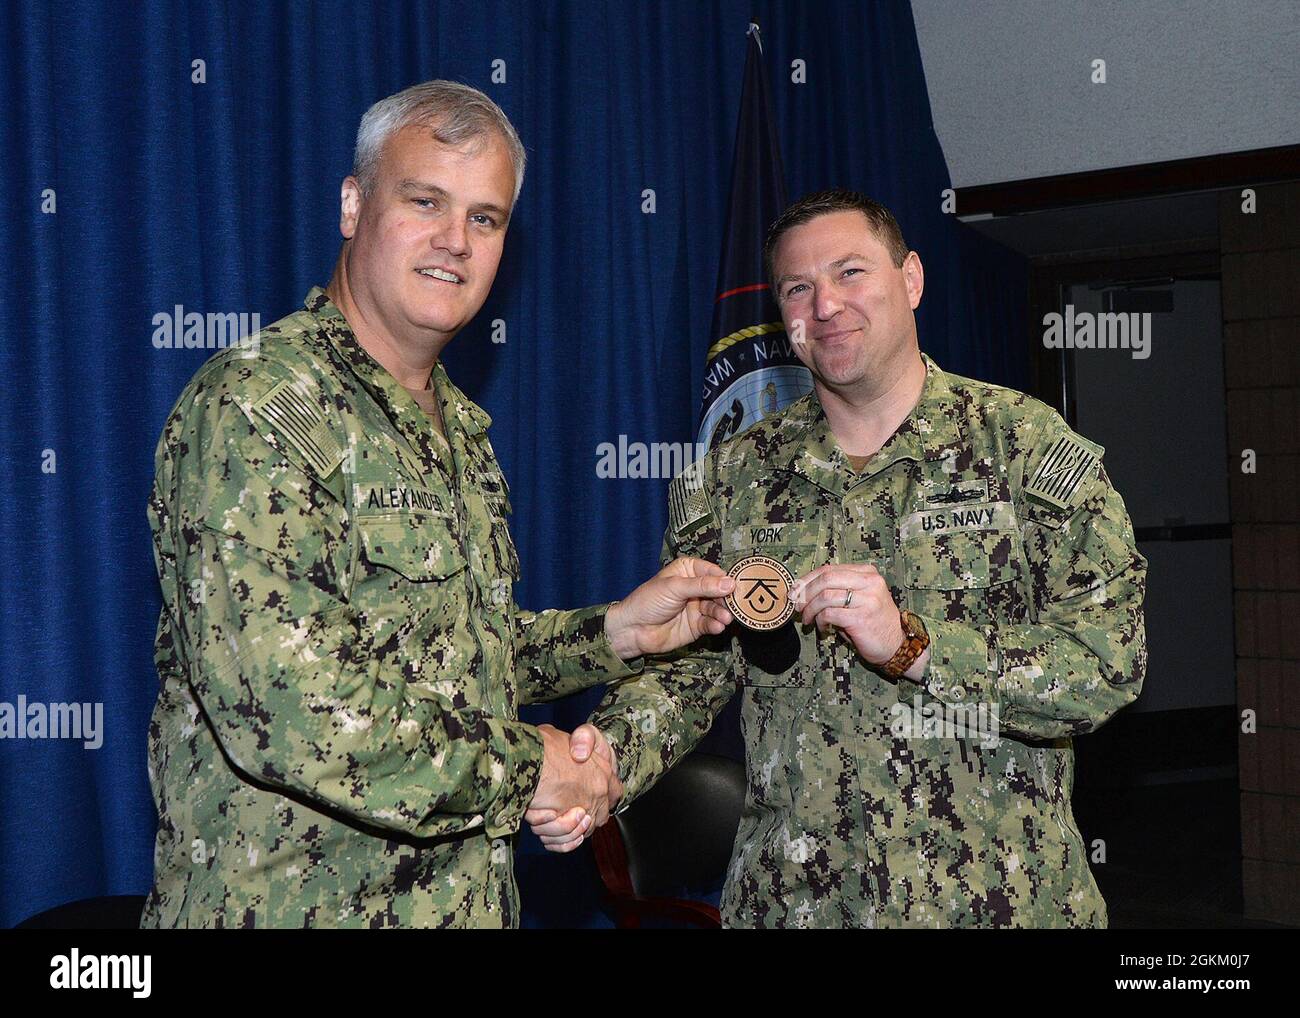 Rear Adm. Christopher Alexander, commander of Naval Surface and Mine Warfighting Development Center (SMWDC) hands an Integrated Air and Missile Defense (IAMD) Warfare Tactics Instructor (WTI) patch to and congratulates Lt. Cmdr. Jeffrey York during a WTI graduation ceremony held onboard Naval Station San Diego May 21st. Stock Photo